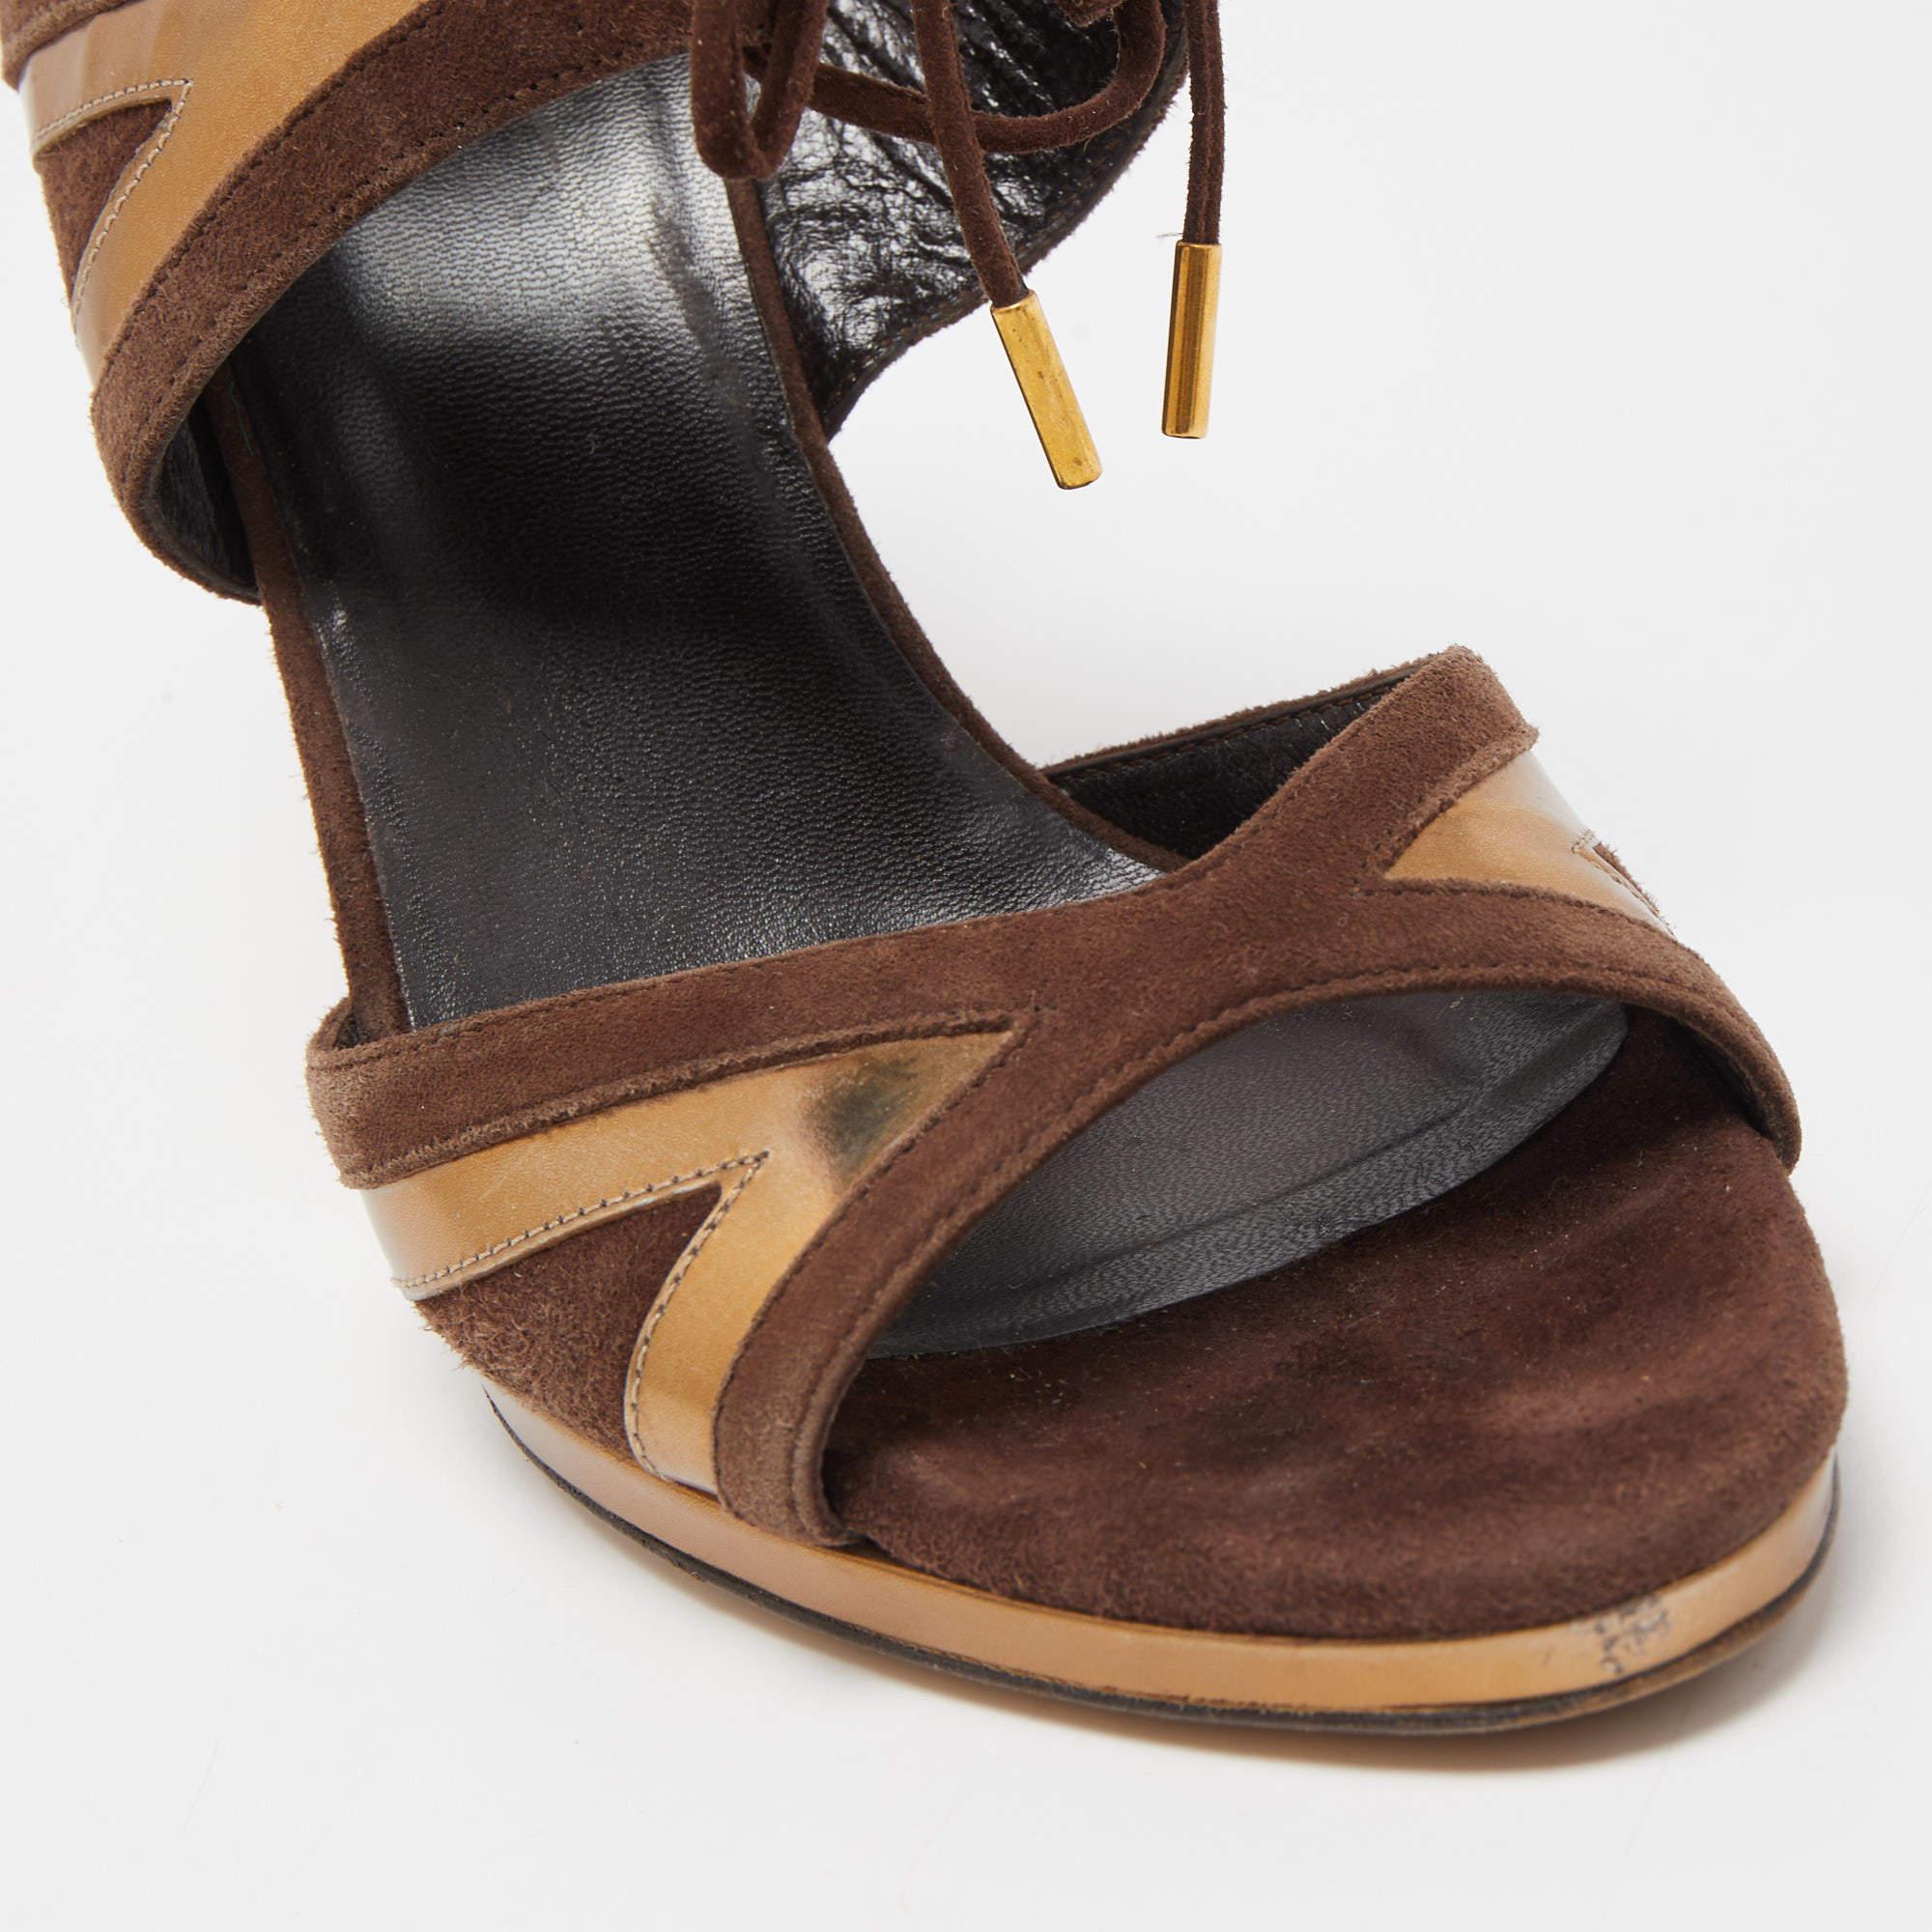 Gucci Brown/Gold Suede and Leather Ankle Tie Sandals Size 37.5 For Sale 3